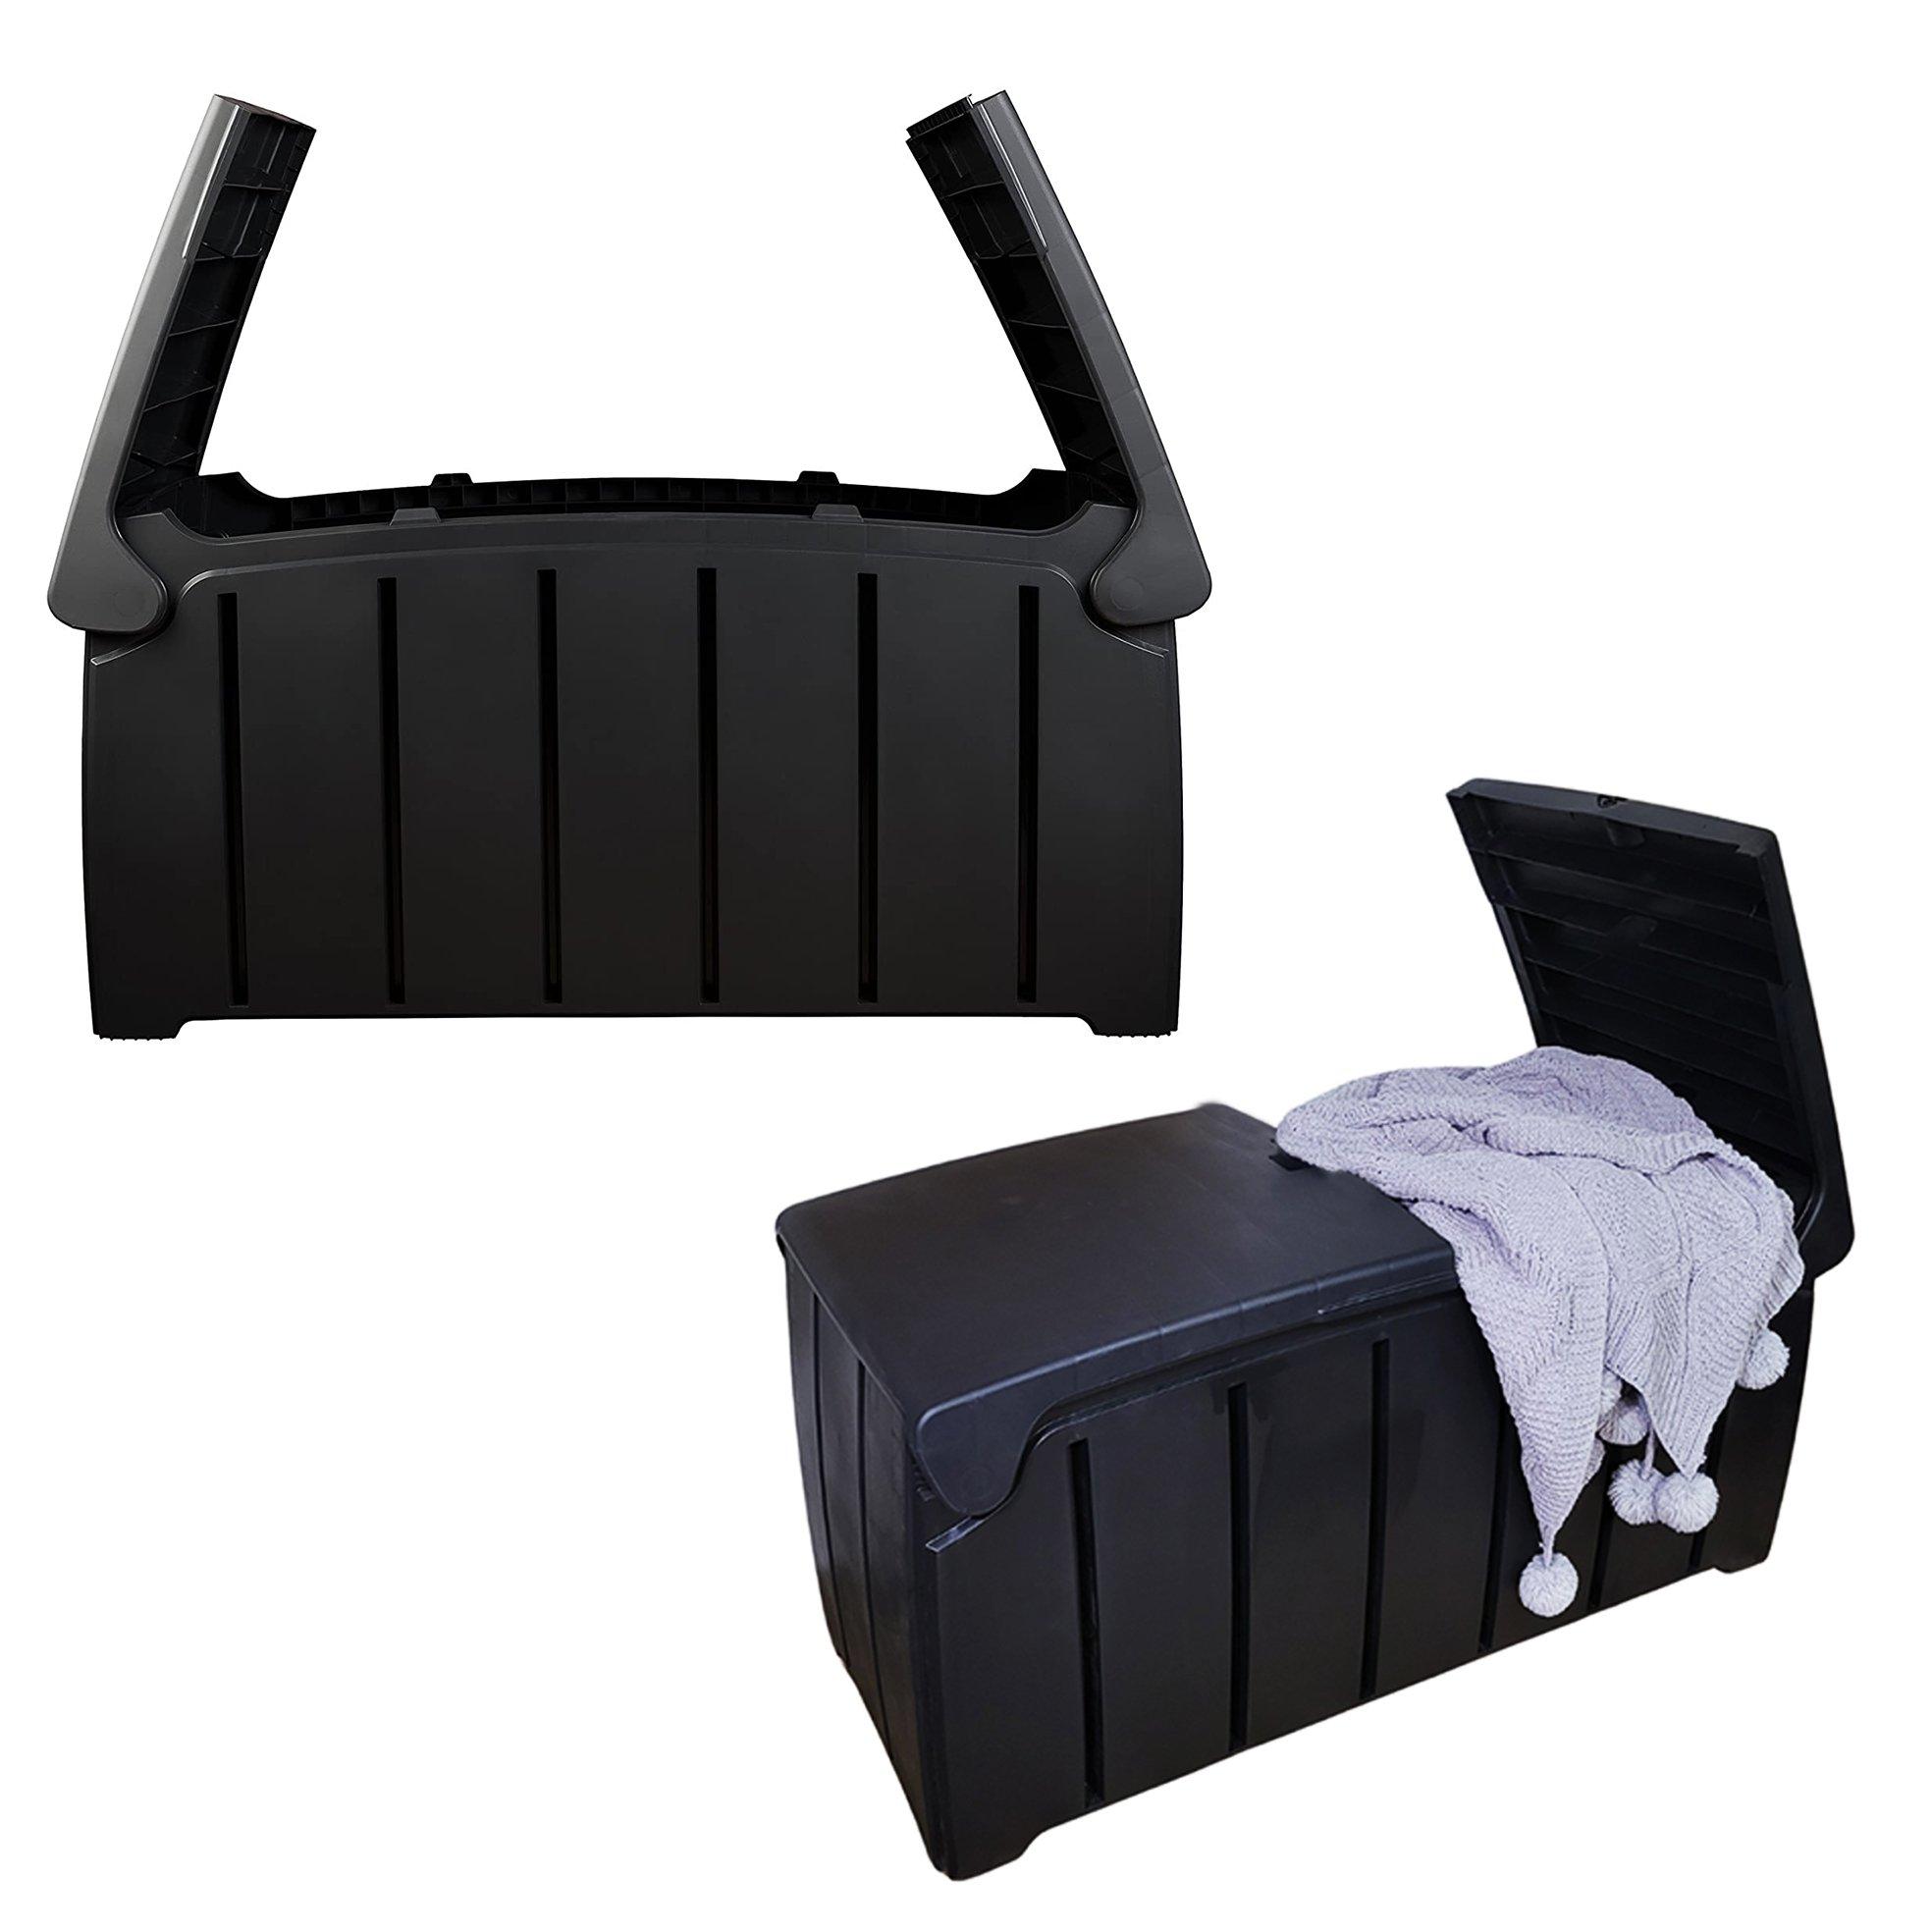 Black 115cm x 55cm x 60cm Butterfly Opening Top 300 Litre Large Garden Storage Box Weatherproof with